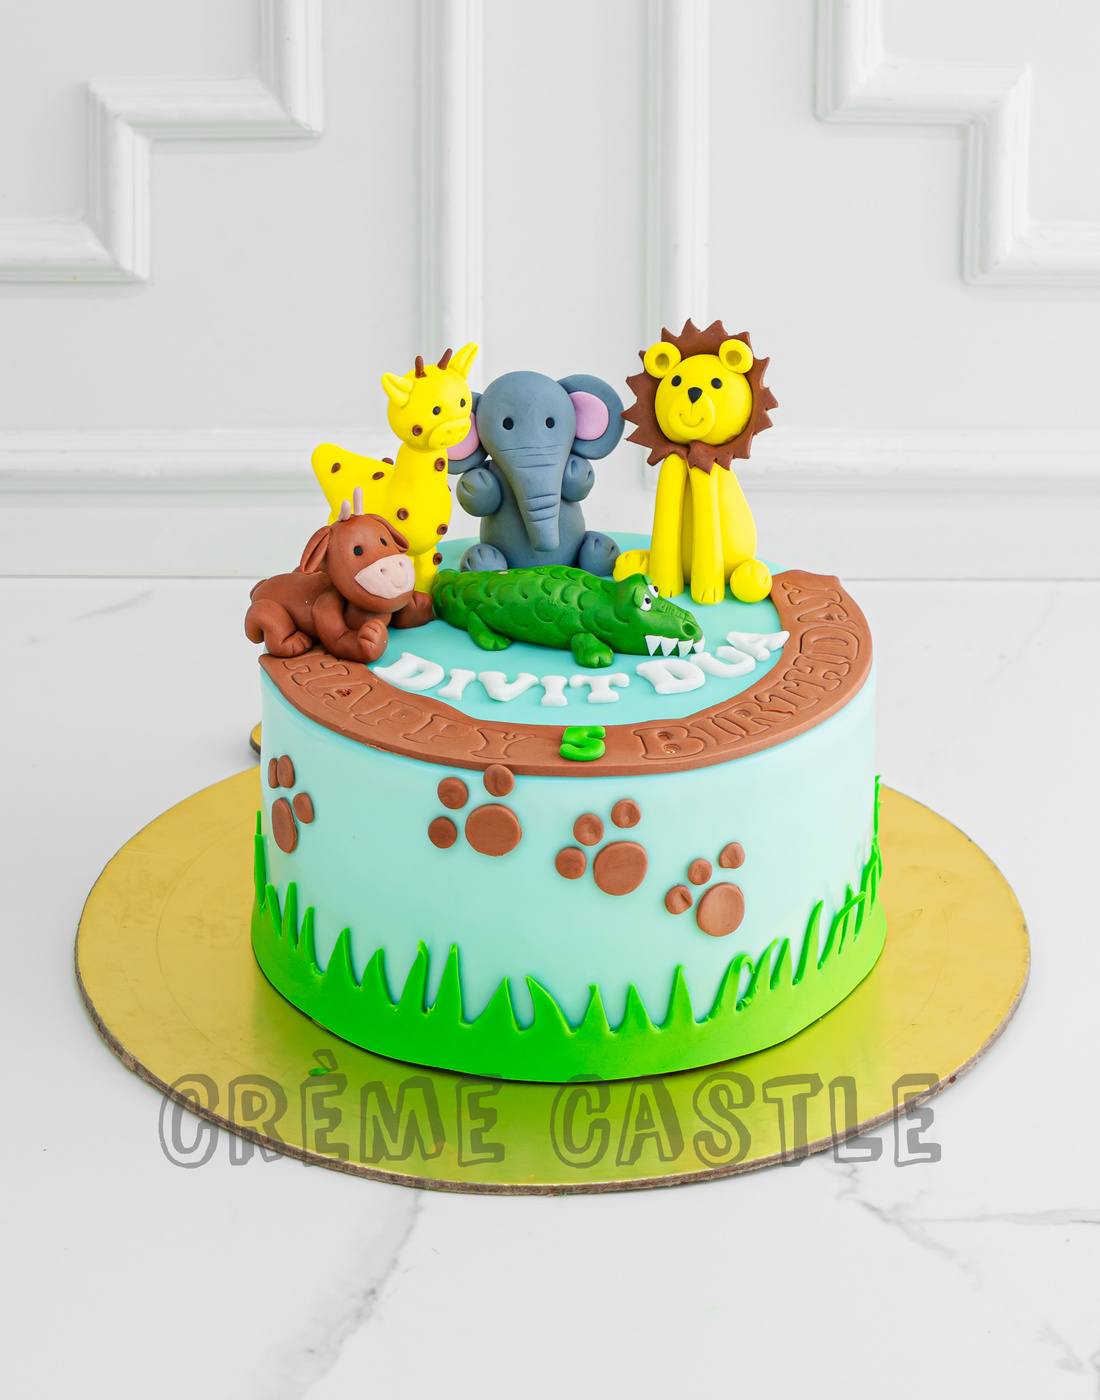 Amazon.com: LEBERY Jungle Safari Cake Toppers Jungle Animal Cake Toppers,  10Pcs Happy Birthday Animal Cake Decoration Giraffe Lion Cake Topper for Jungle  Safari Animal Wild One Birthday Baby Shower Party Supplies :